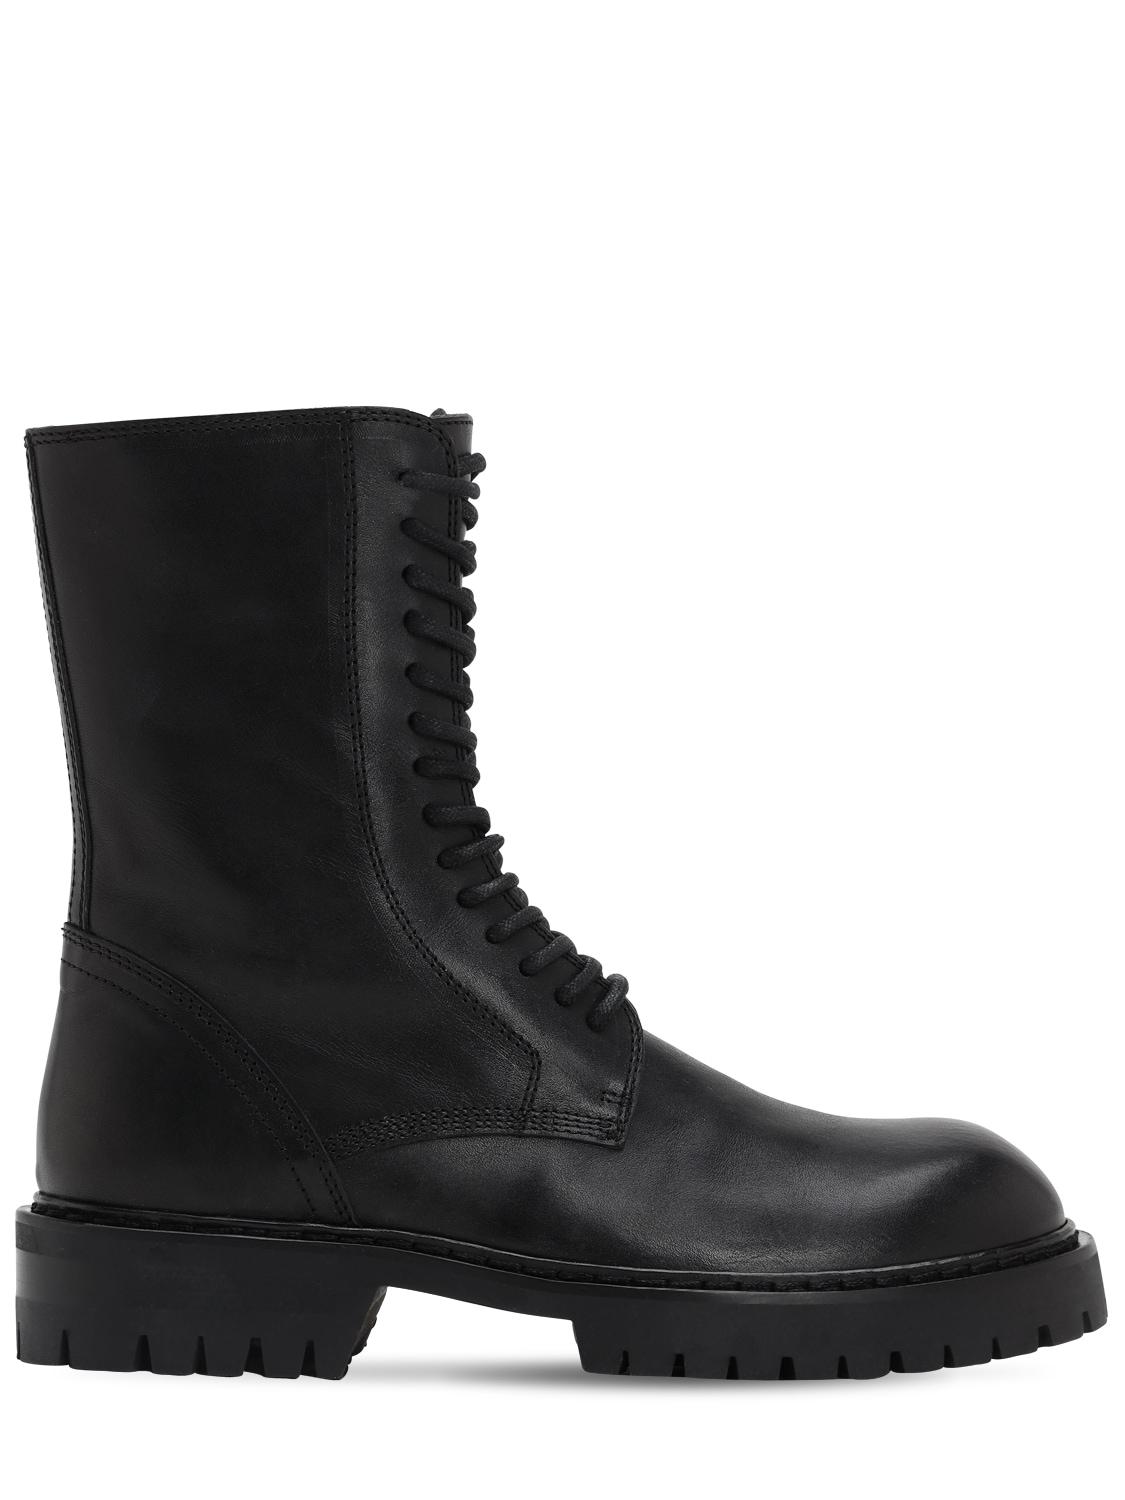 Ann Demeulemeester 30mm Brushed Leather Combat Boots in Black - Lyst